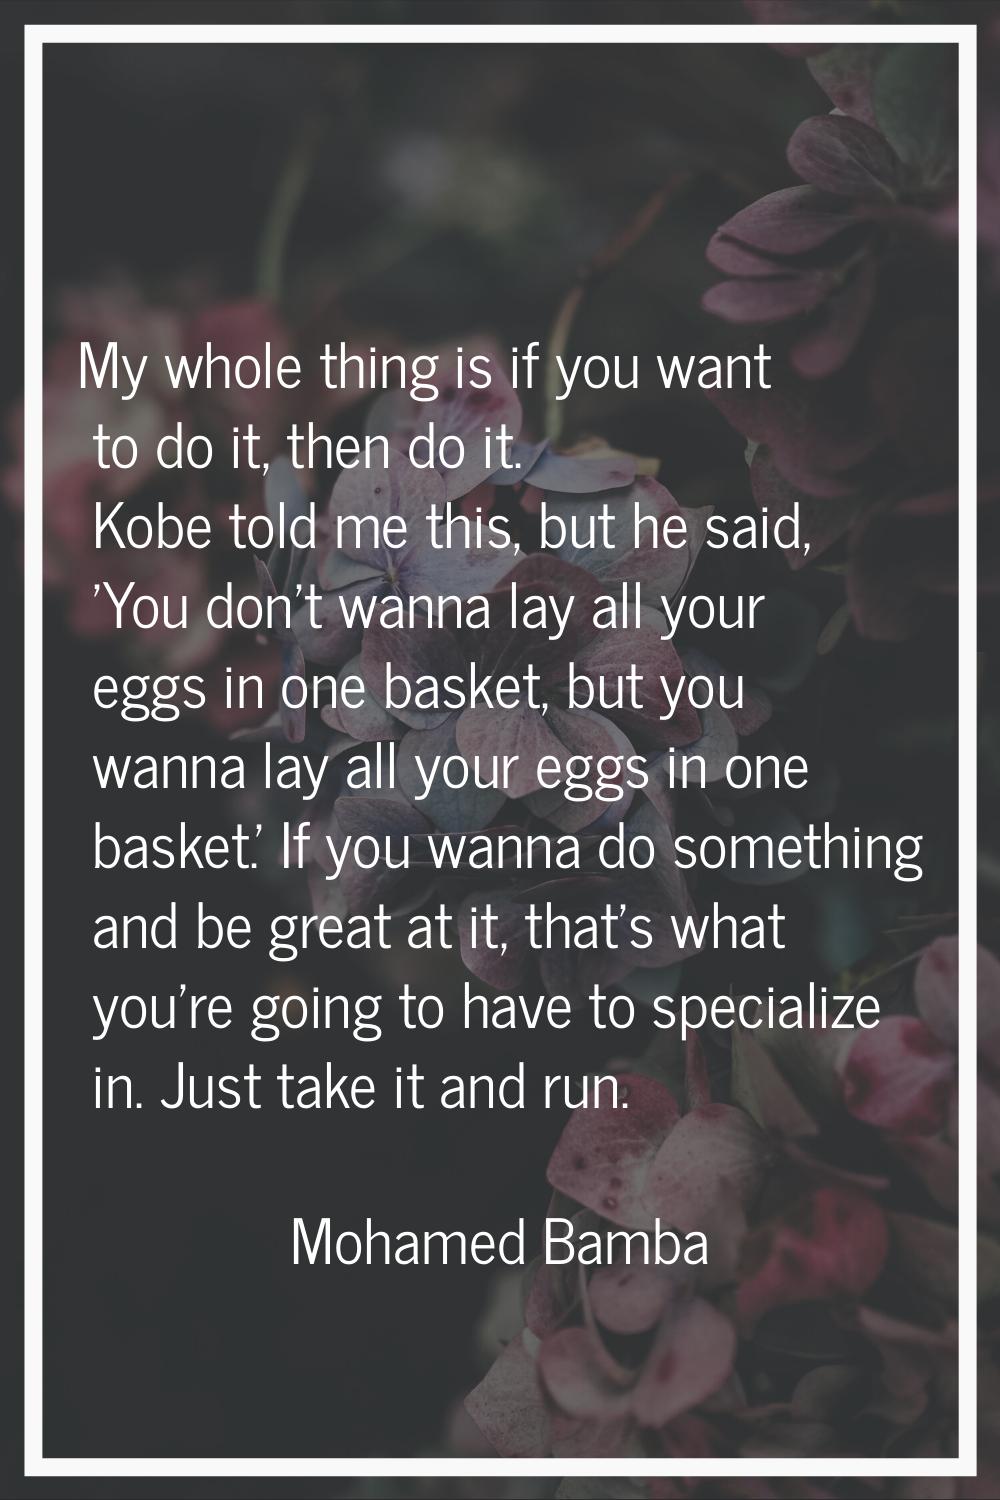 My whole thing is if you want to do it, then do it. Kobe told me this, but he said, 'You don't wann